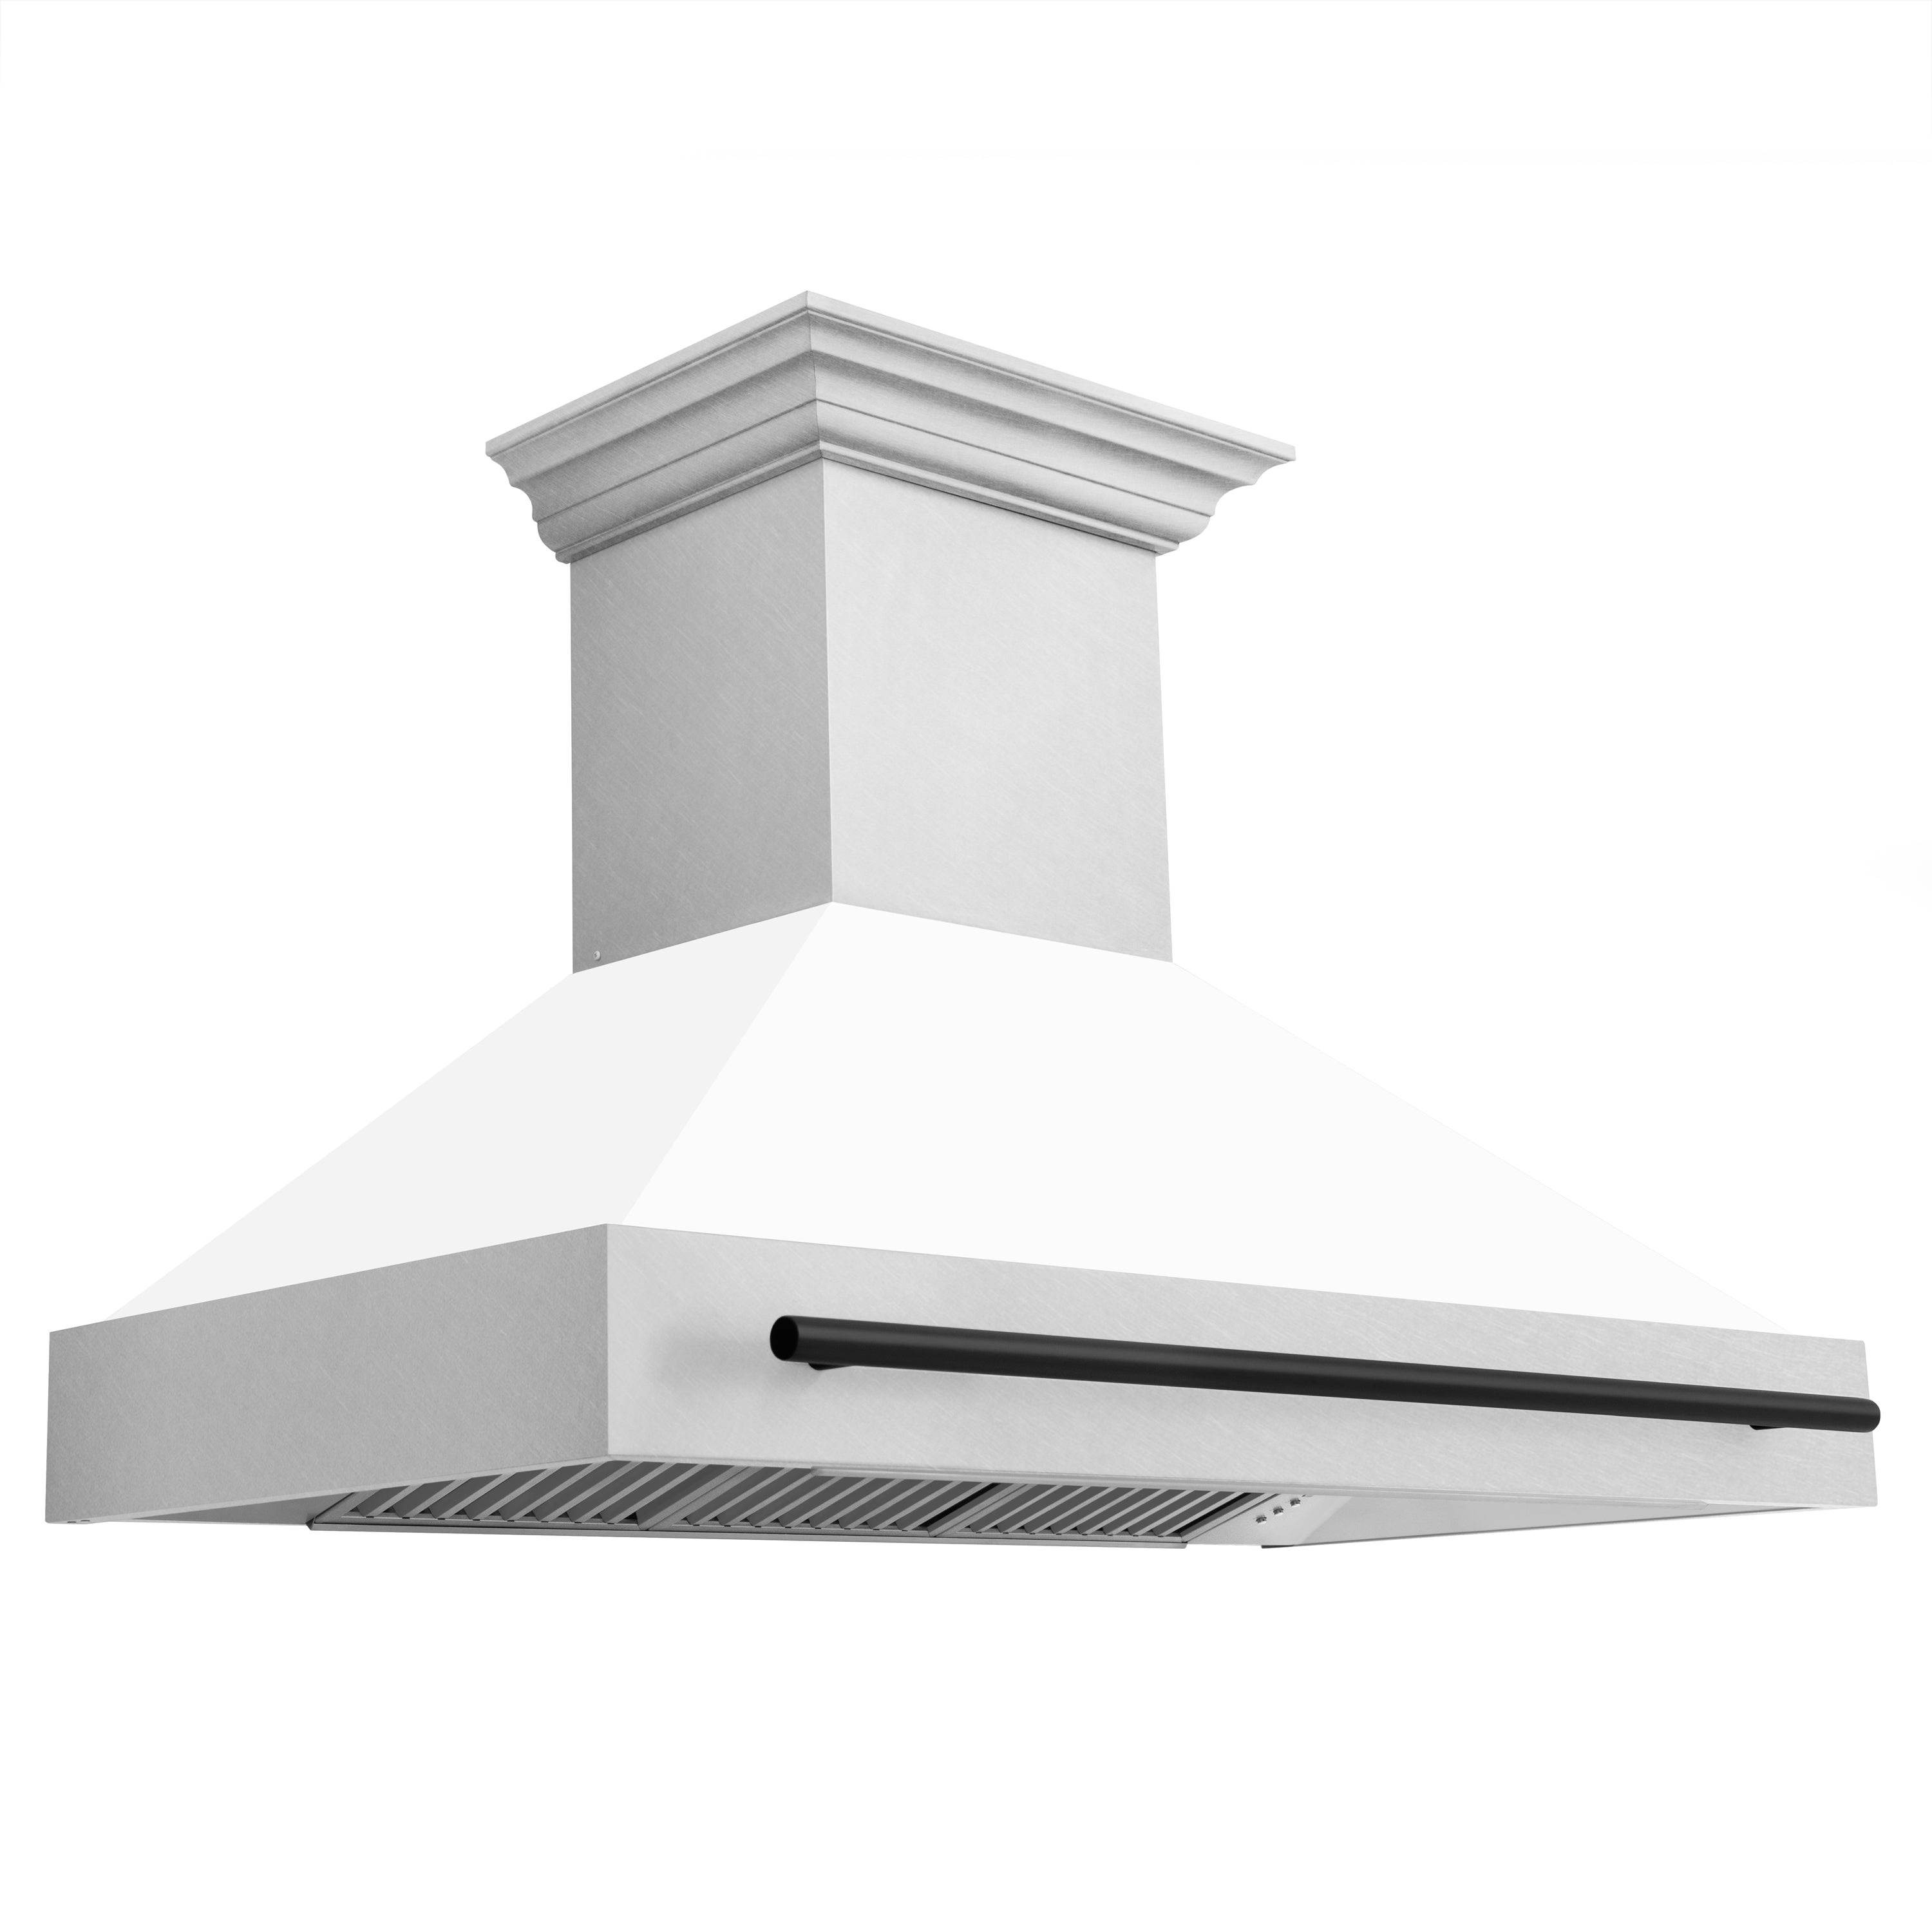 Zline Kitchen and Bath ZLINE 48" Autograph Edition Fingerprint Resistant Stainless Steel Range Hood with White Matte Shell and Accent Handle - 48 Inch